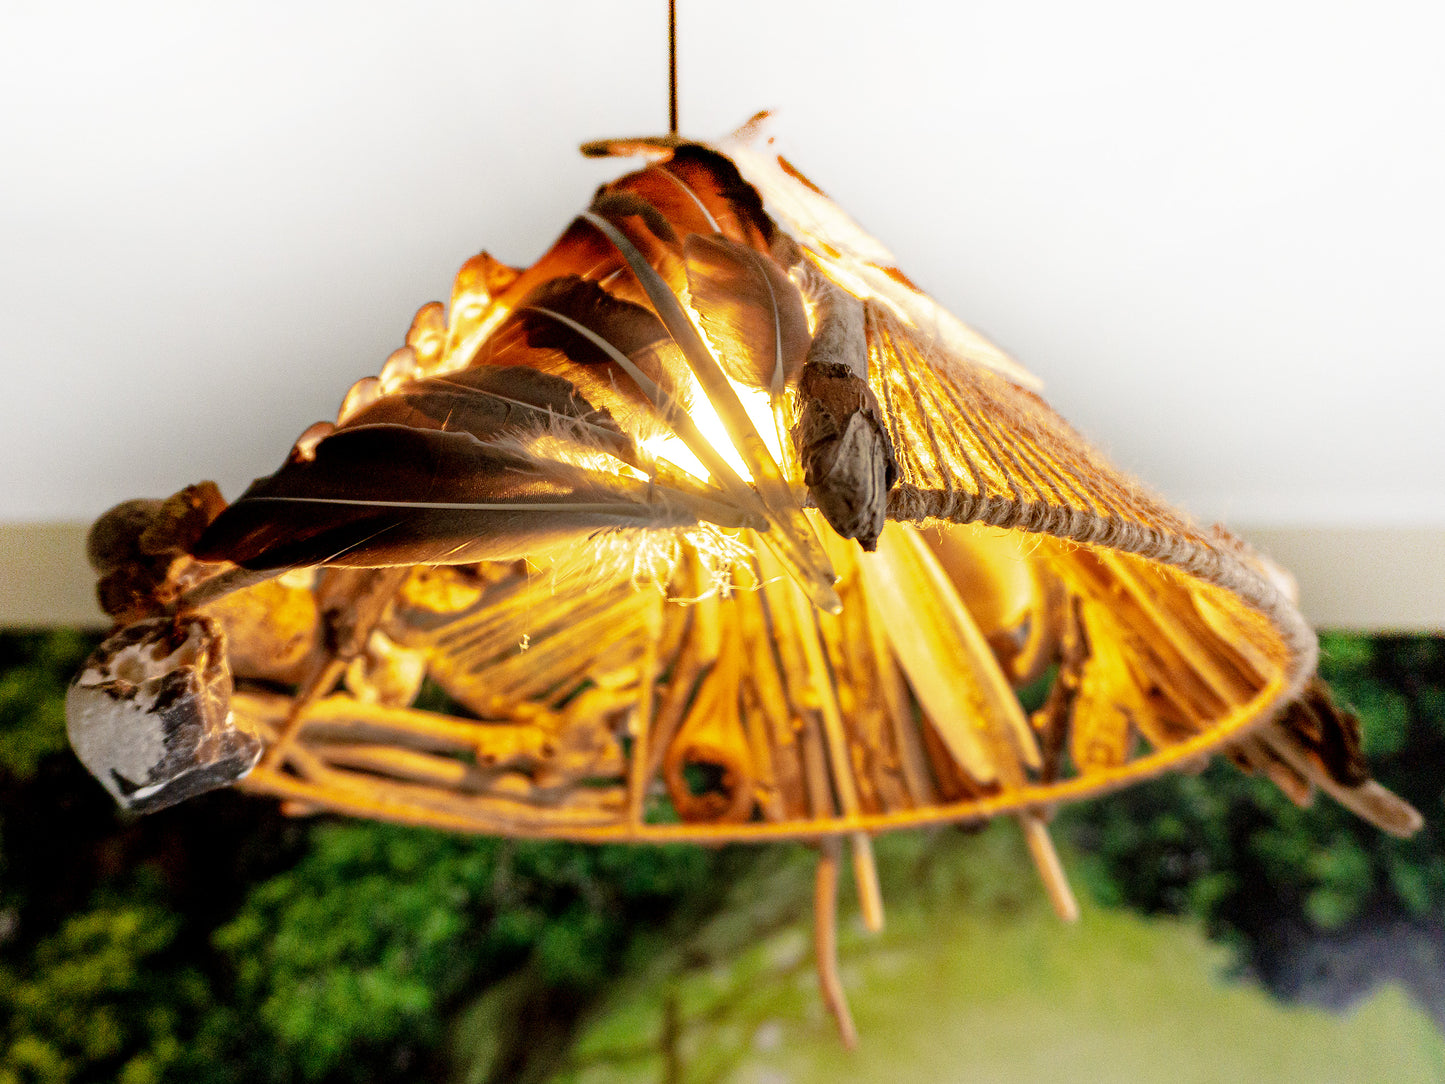 One-of-a-kind DRIFTWOOD PENDANT LIGHT 'Tallin', hand-crafted ceiling lamp